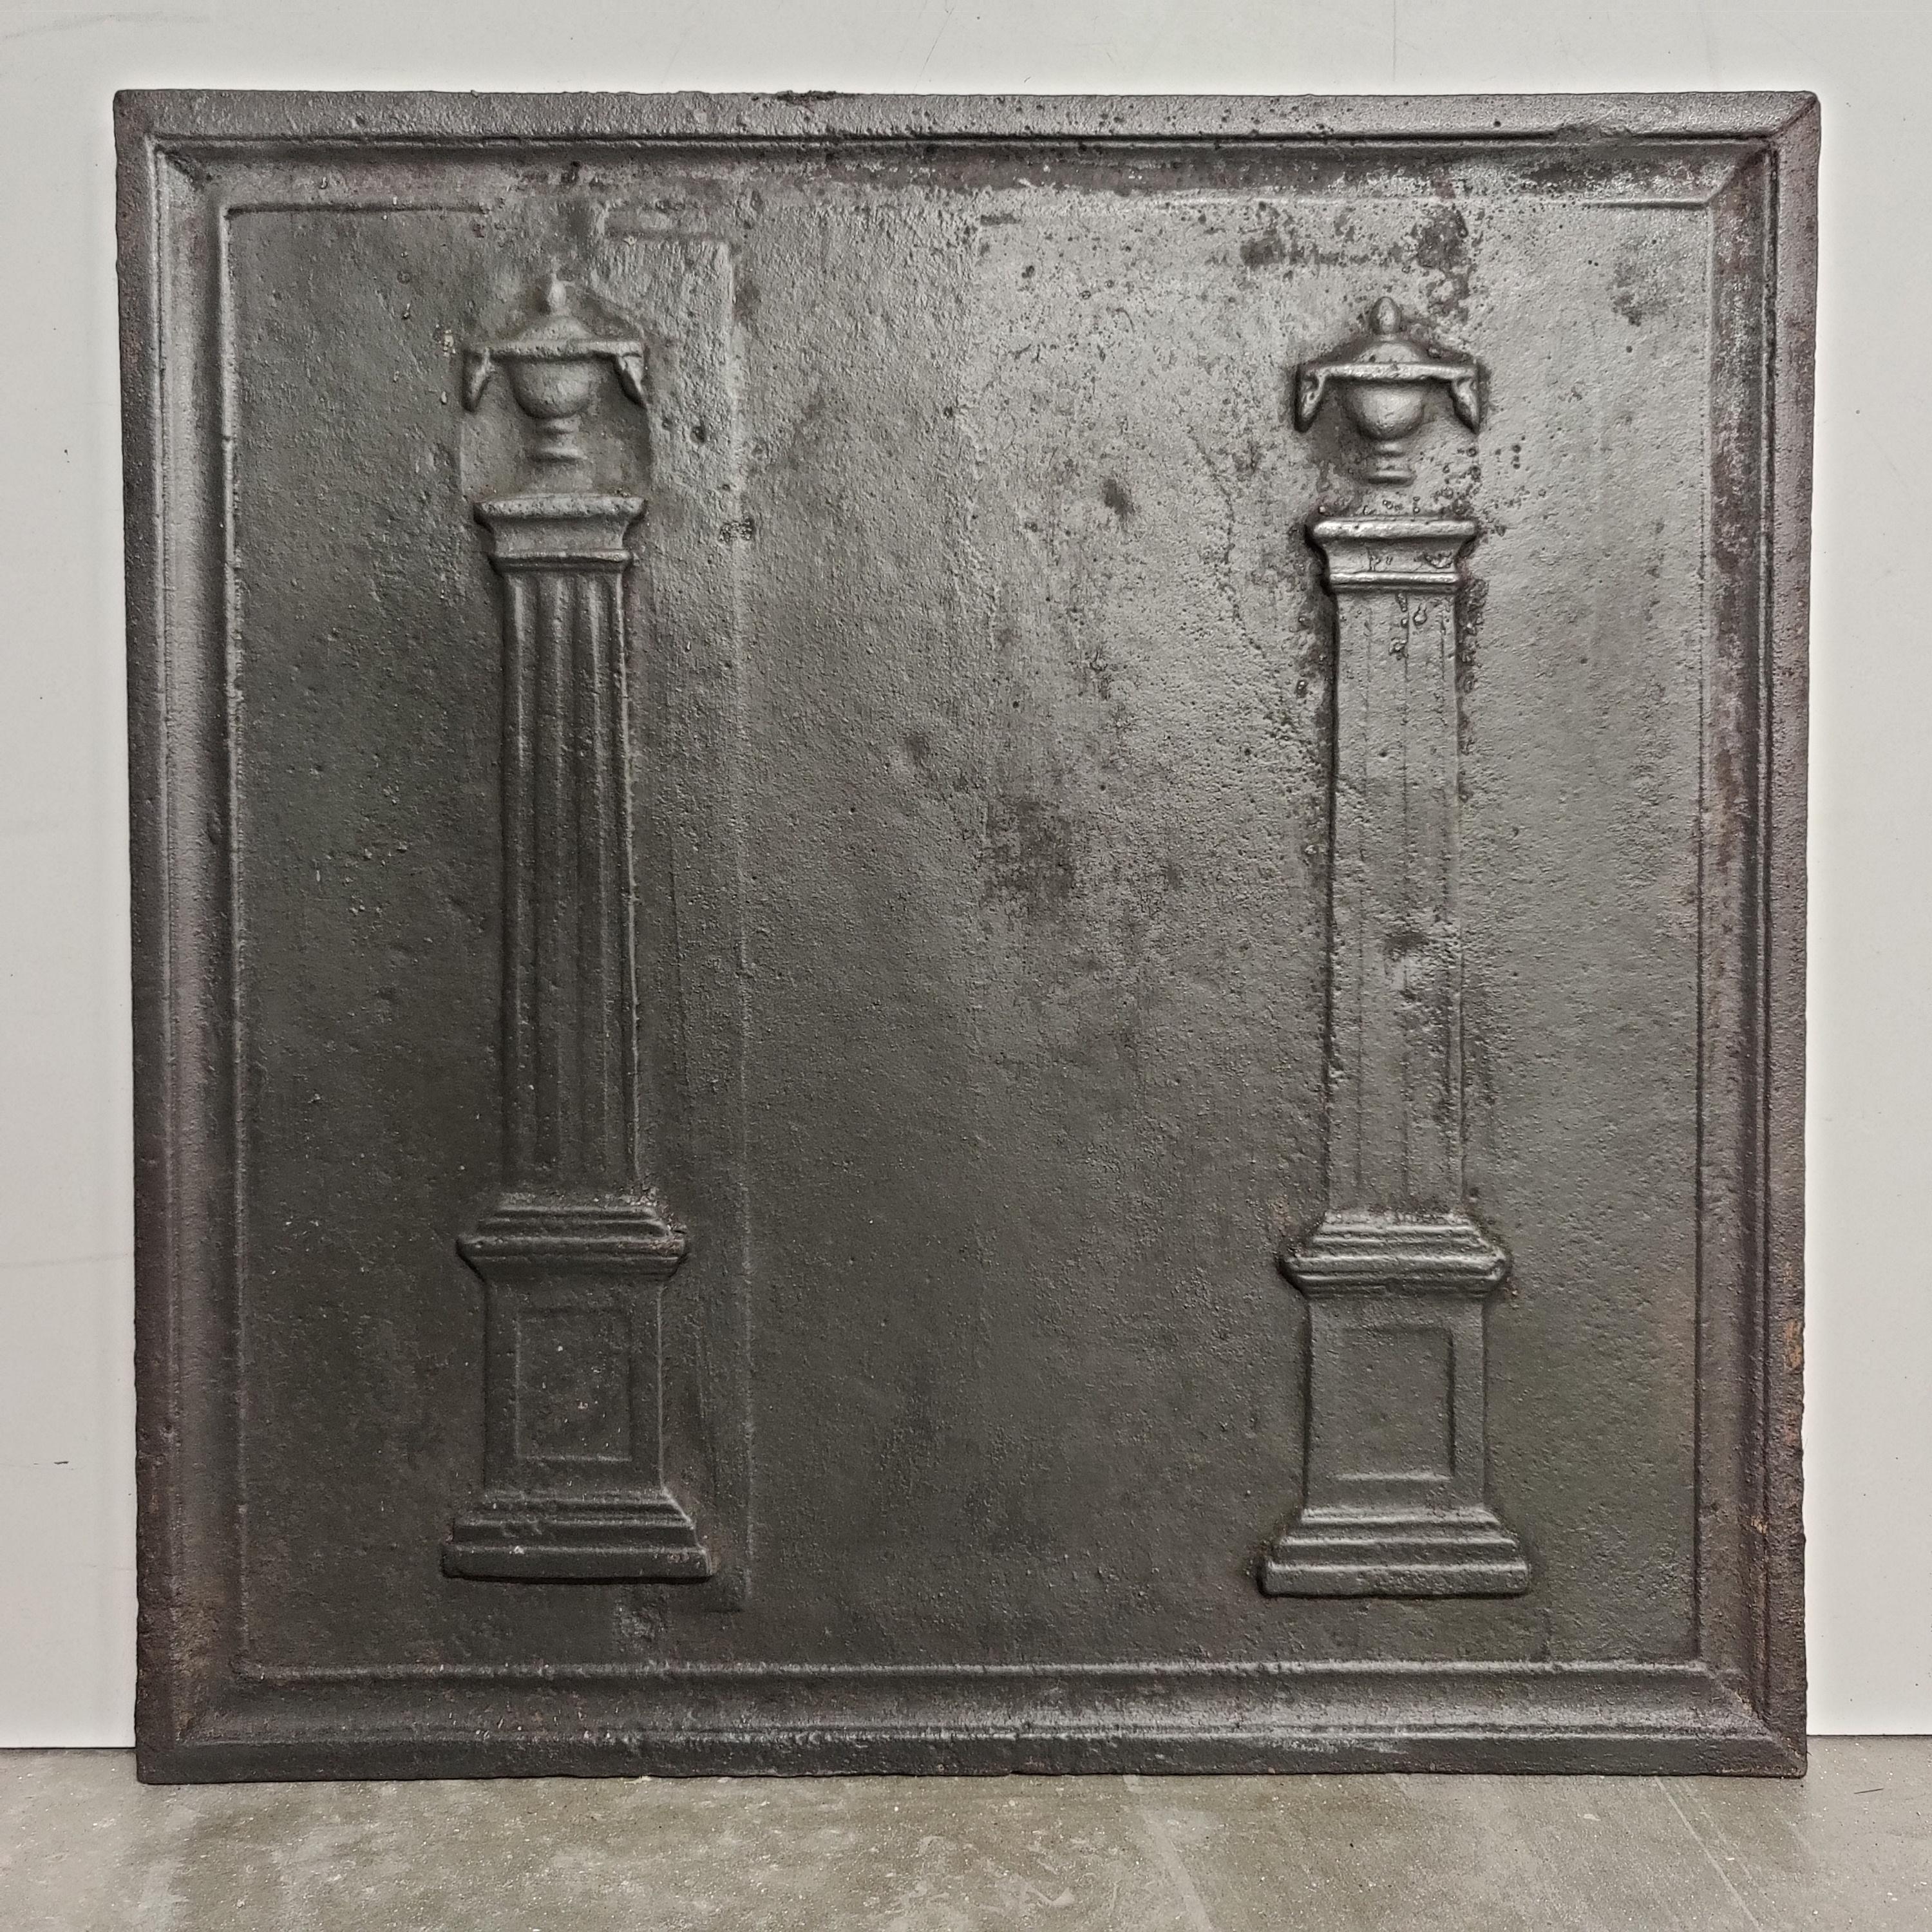 Antique Fireback / Backsplash, Pillars of Freedom.

Nice square cast iron antique fireback displaying the pillars of freedom.
A symbol for freedom during the French Revolution.
Great condition, can be used in a real gas or log fire.
Very